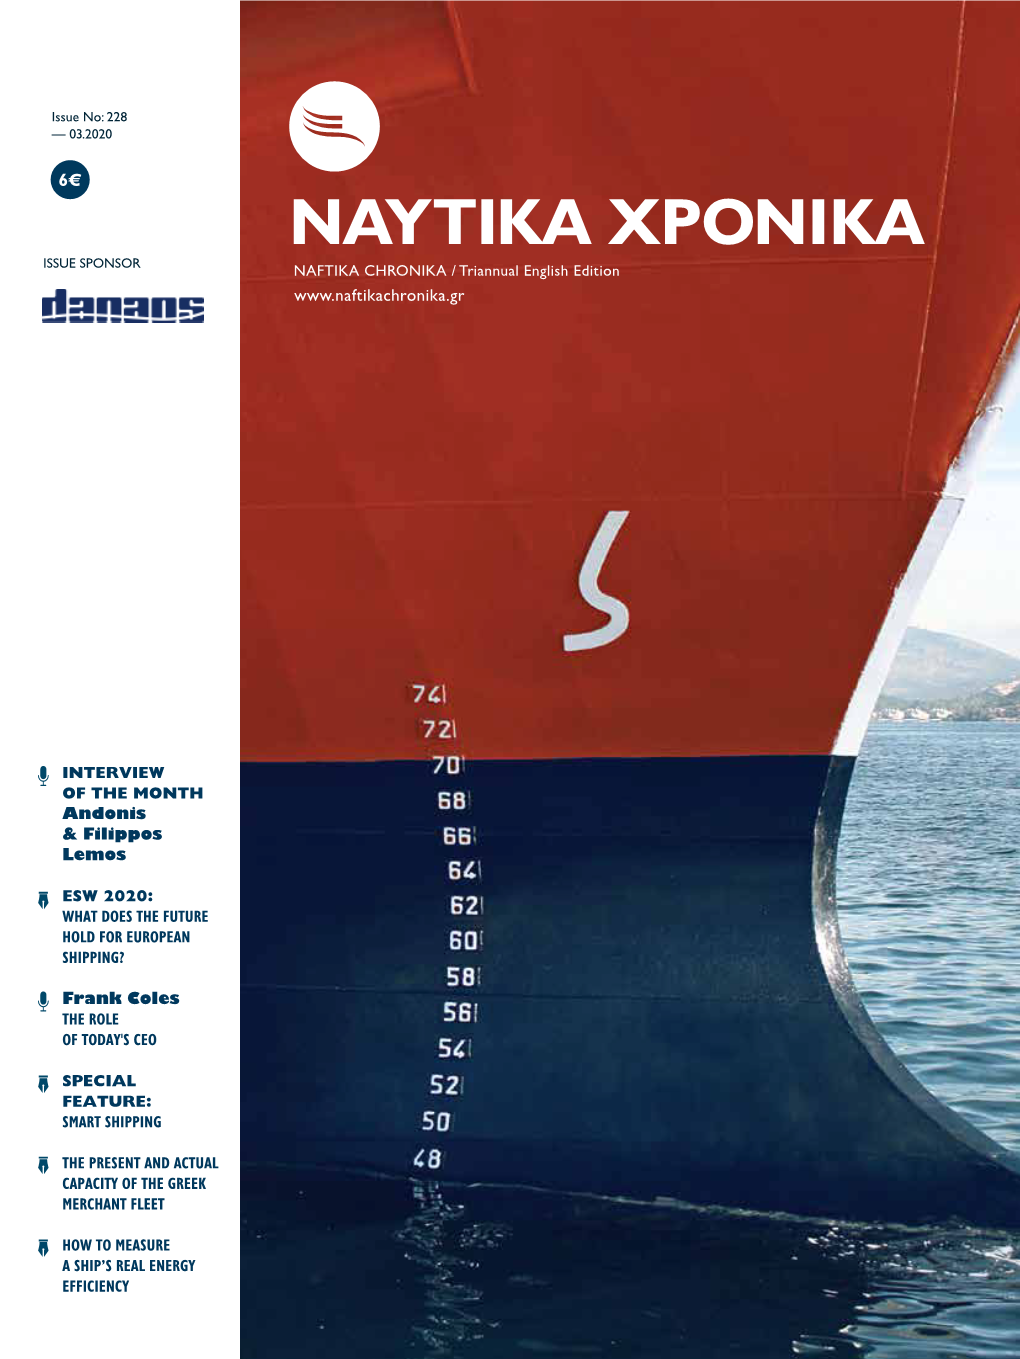 The New Generation of Greek Seafarers Talks with the Shipping